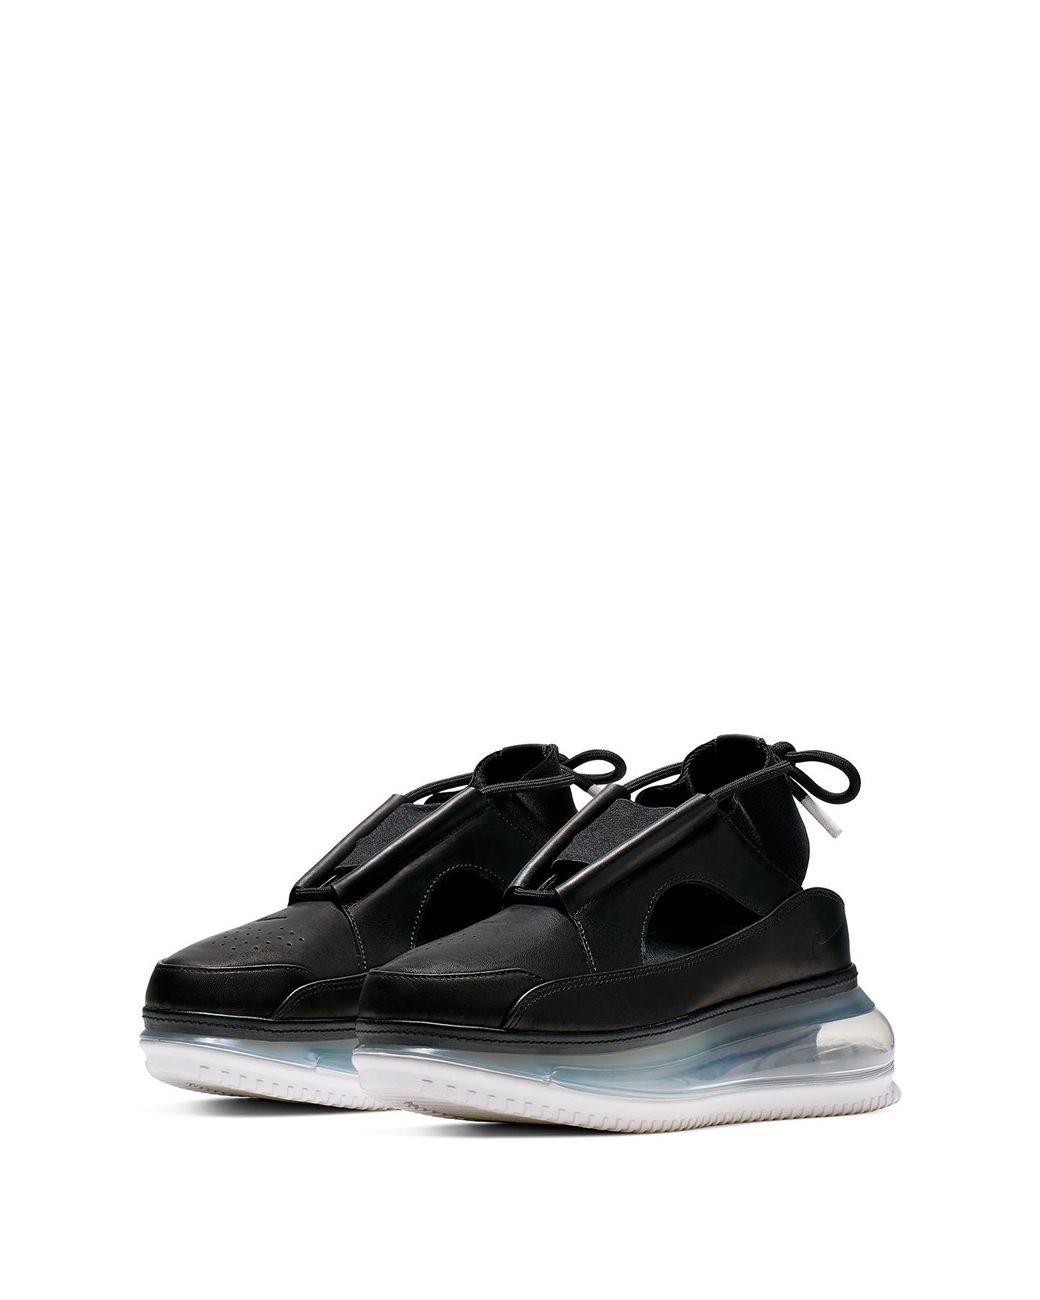 Nike Leather Air Max Ff 720 Shoe in Black | Lyst